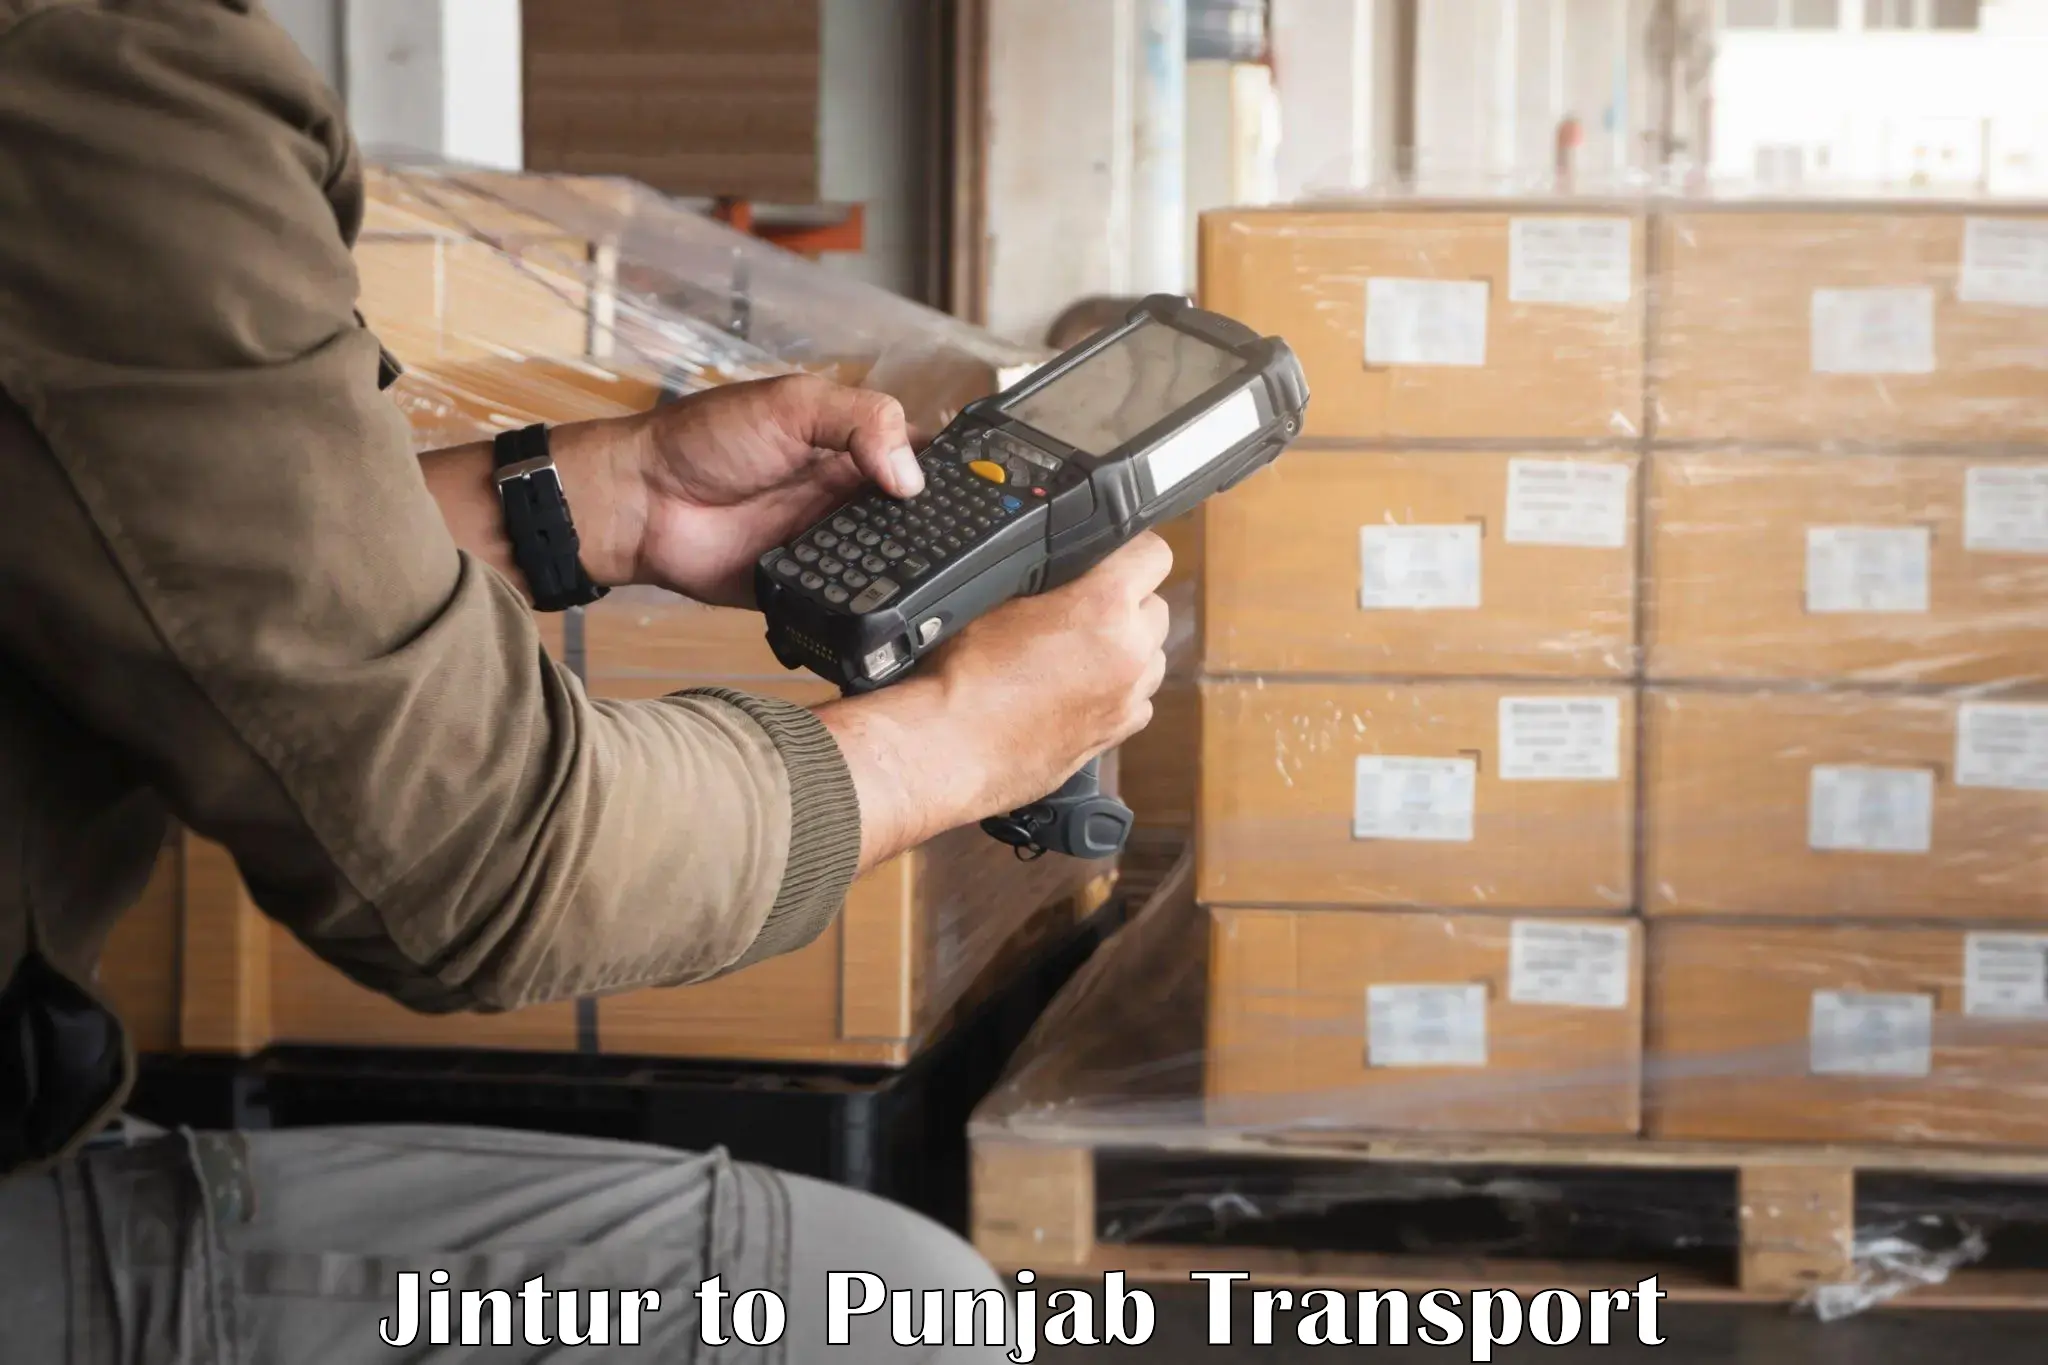 Air freight transport services Jintur to Sultanpur Lodhi